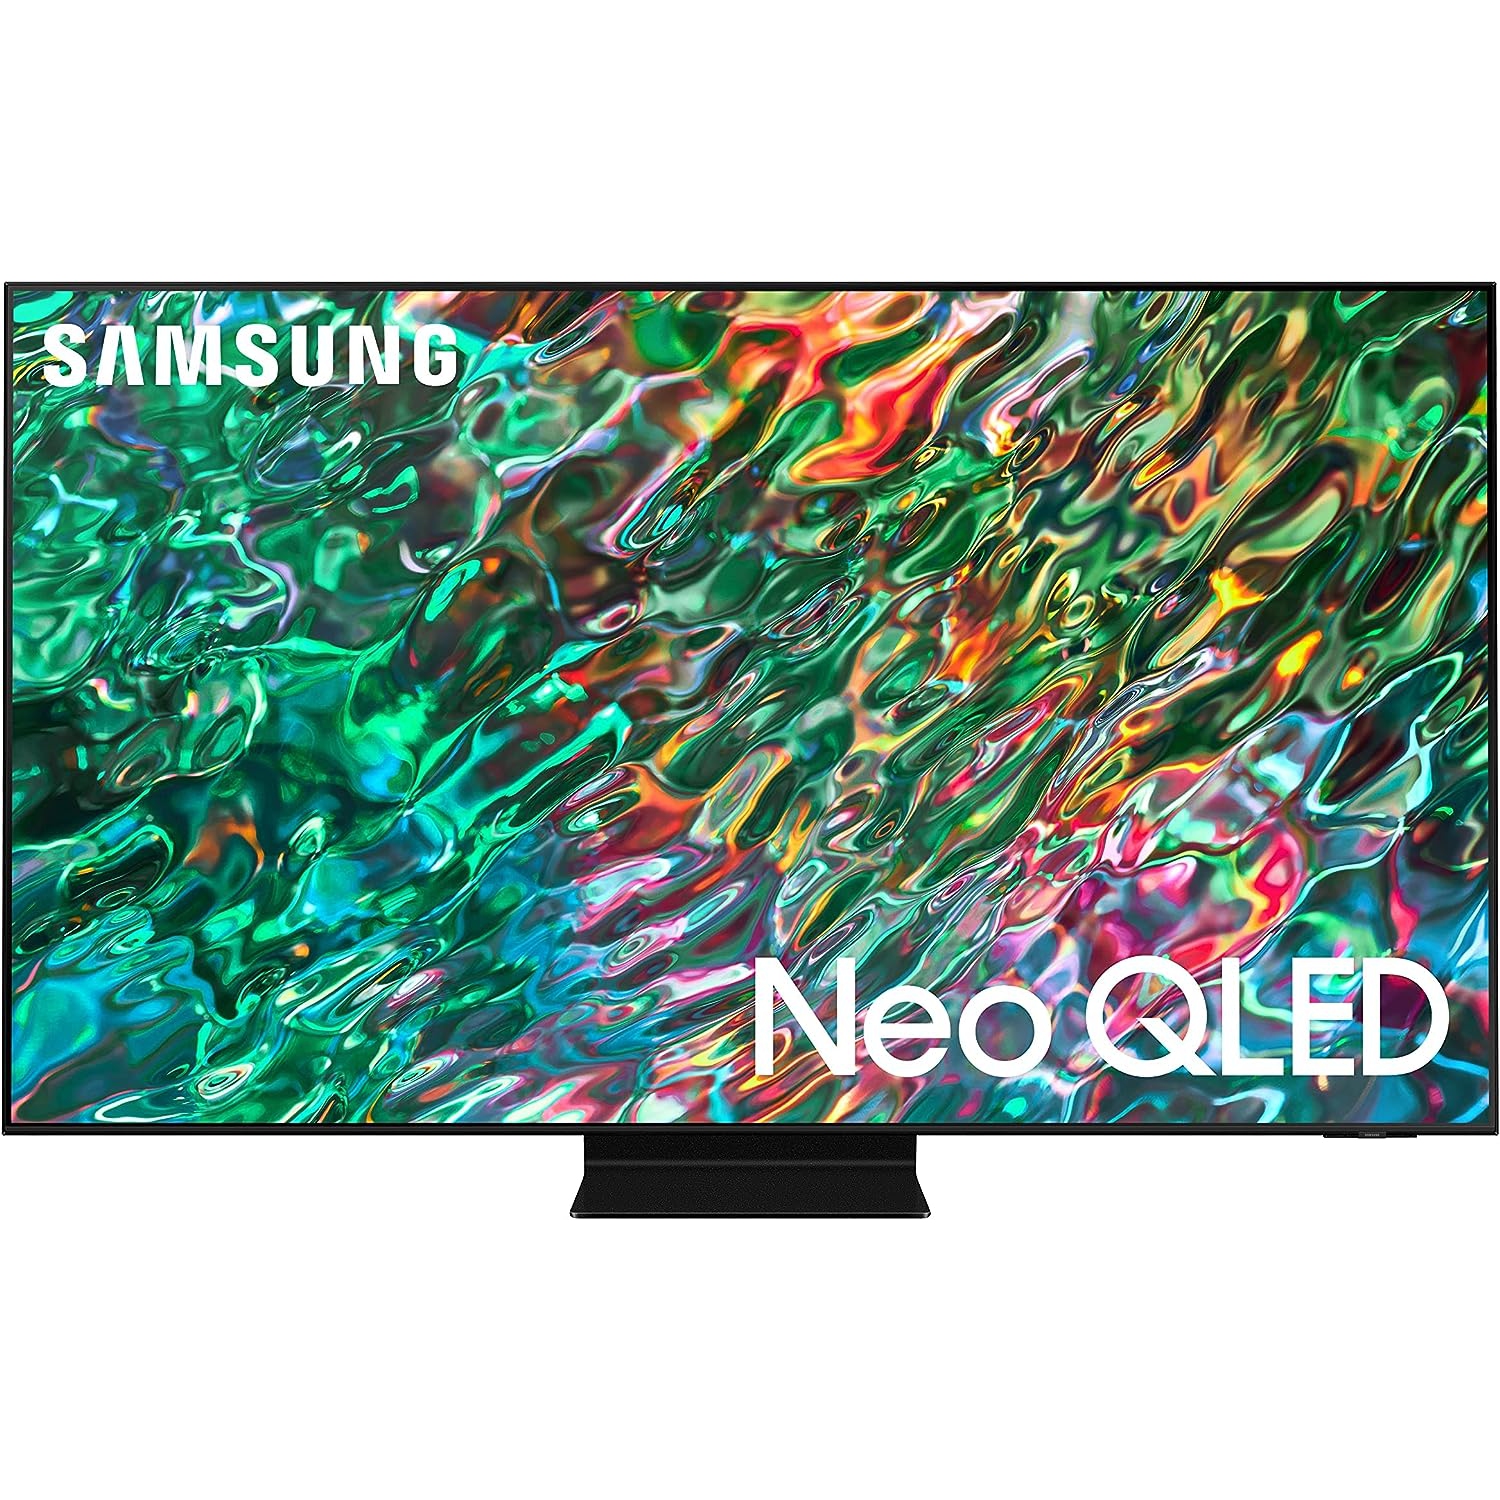 Samsung 75" 4K UHD HDR Neo QLED Tizen Smart TV (QN75QN90CAFXZC) - 2023 - Open Box 10/10 Condition With 1 Year Samsung Warranty